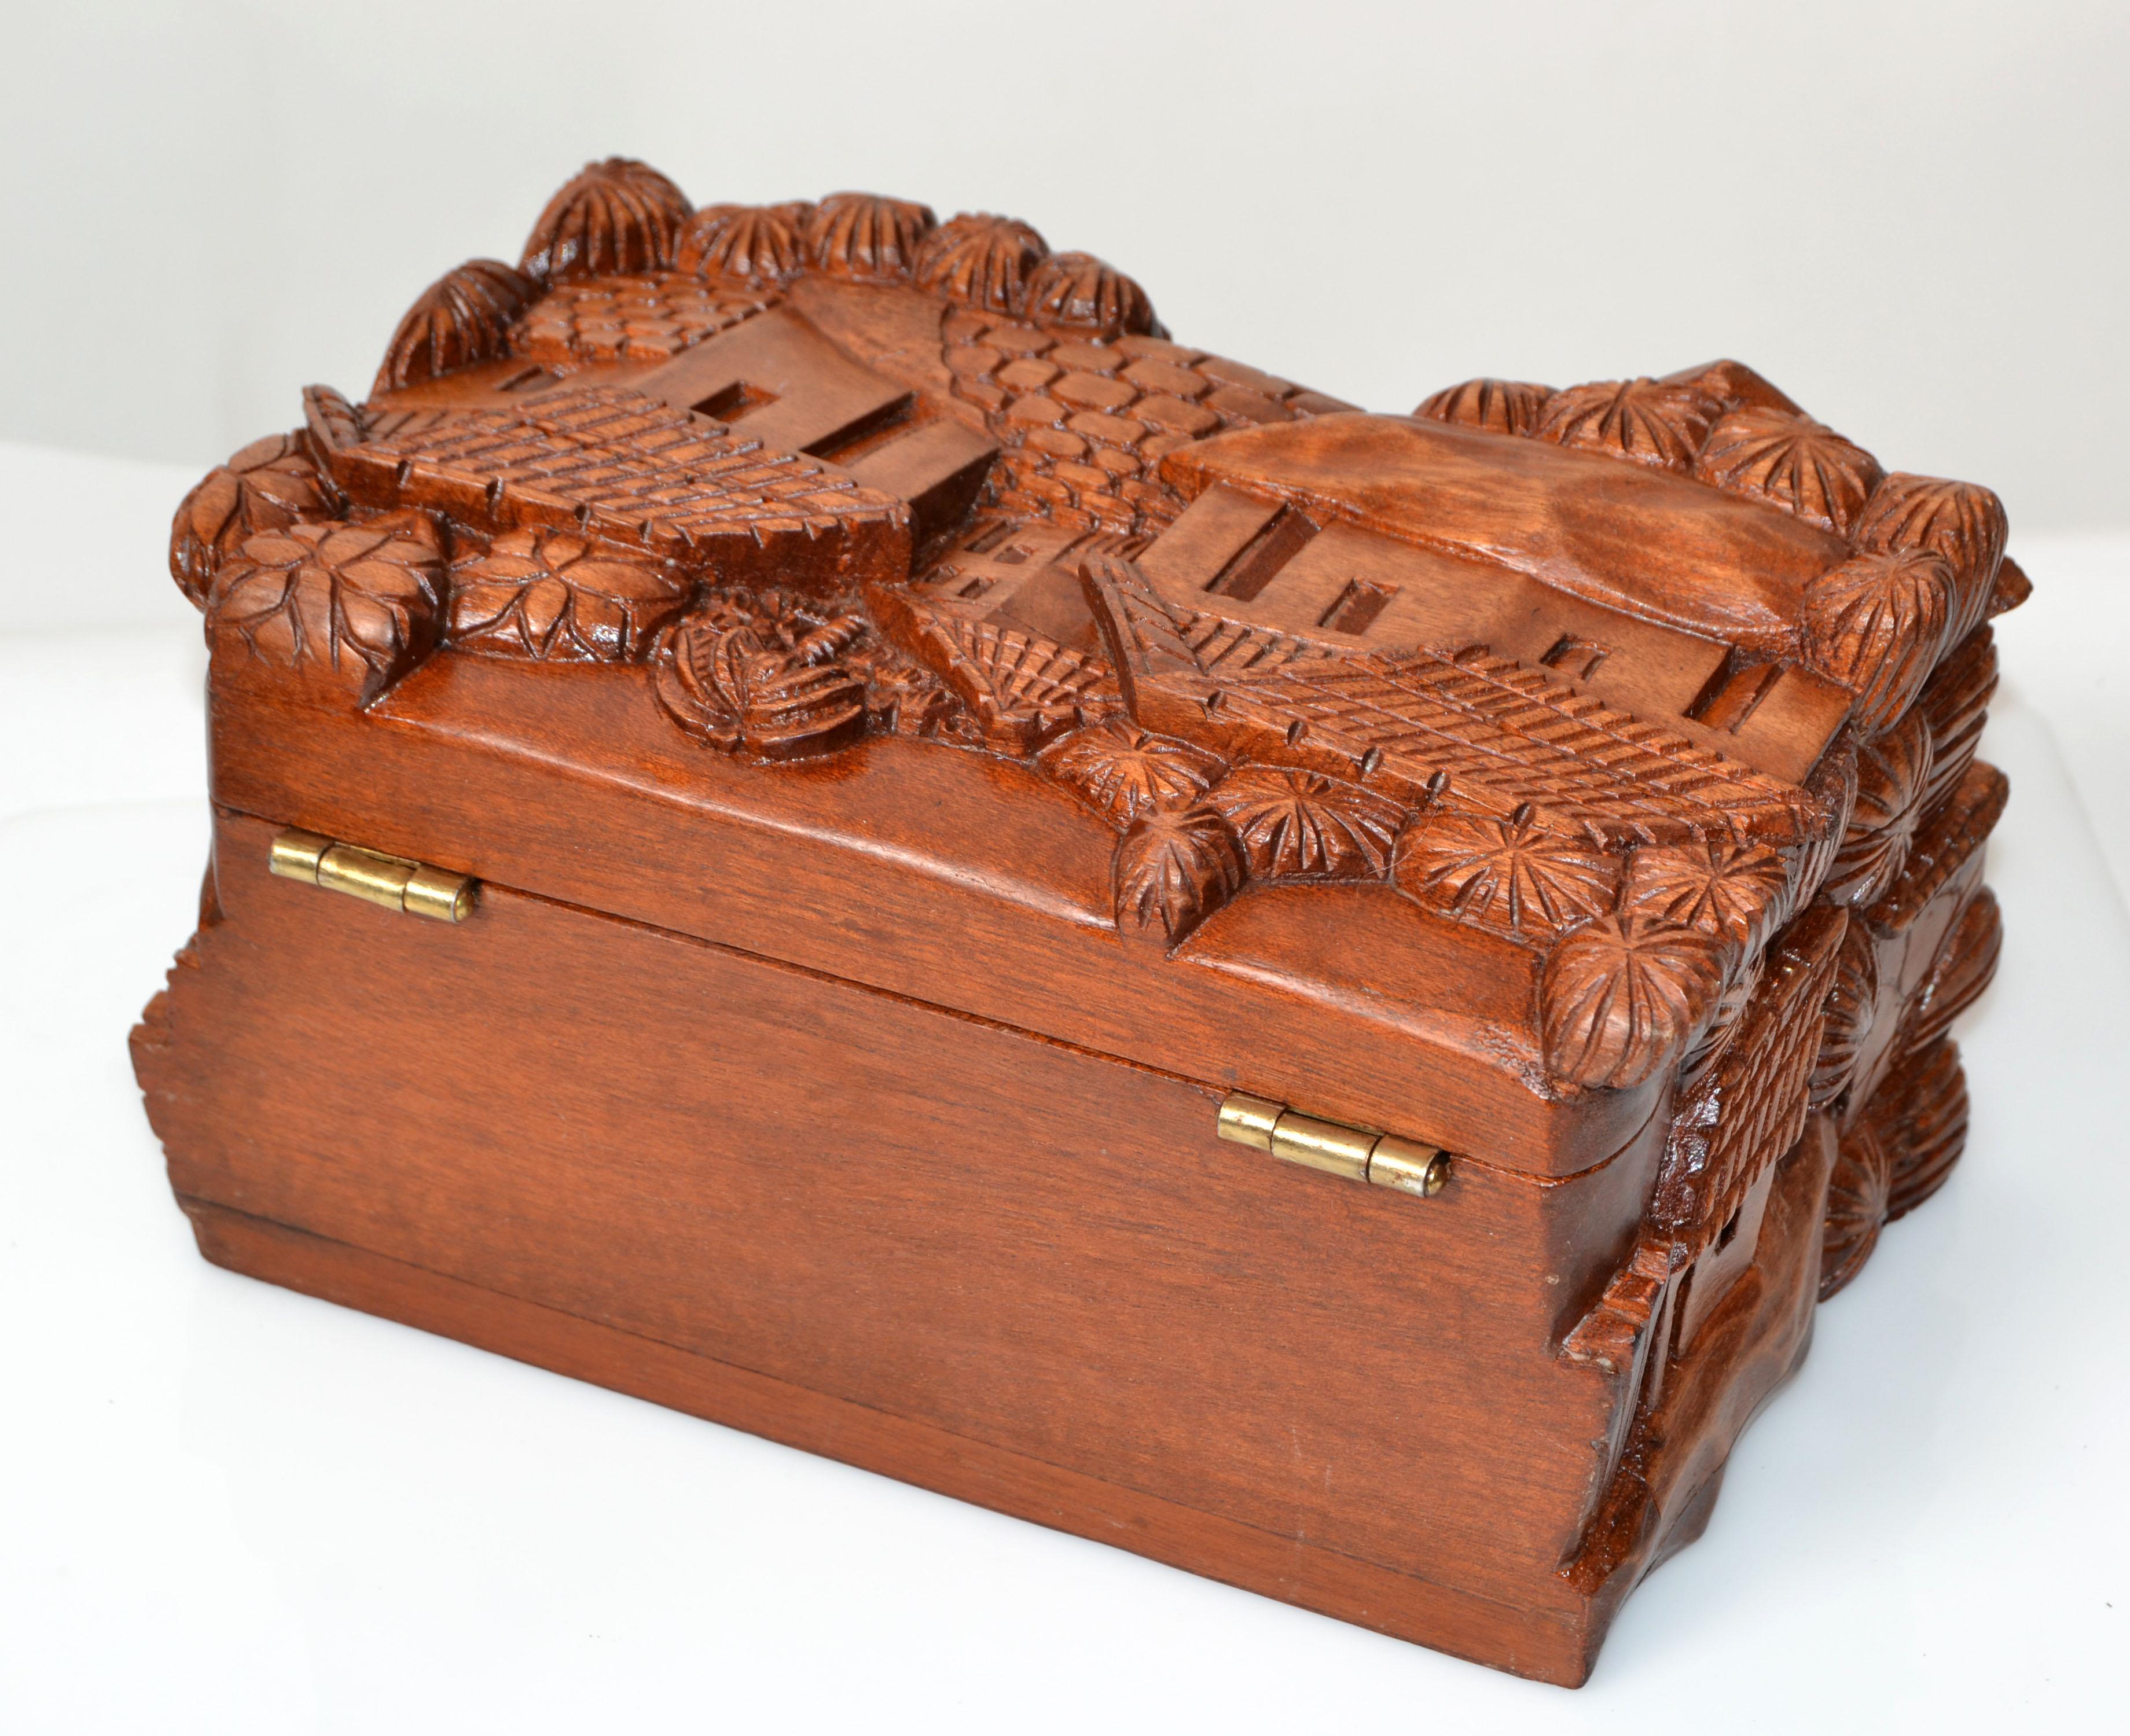 Hand-Carved Vintage Handcrafted and Carved Wood Box House Motif, Trinket Box, Keepsake Box   For Sale